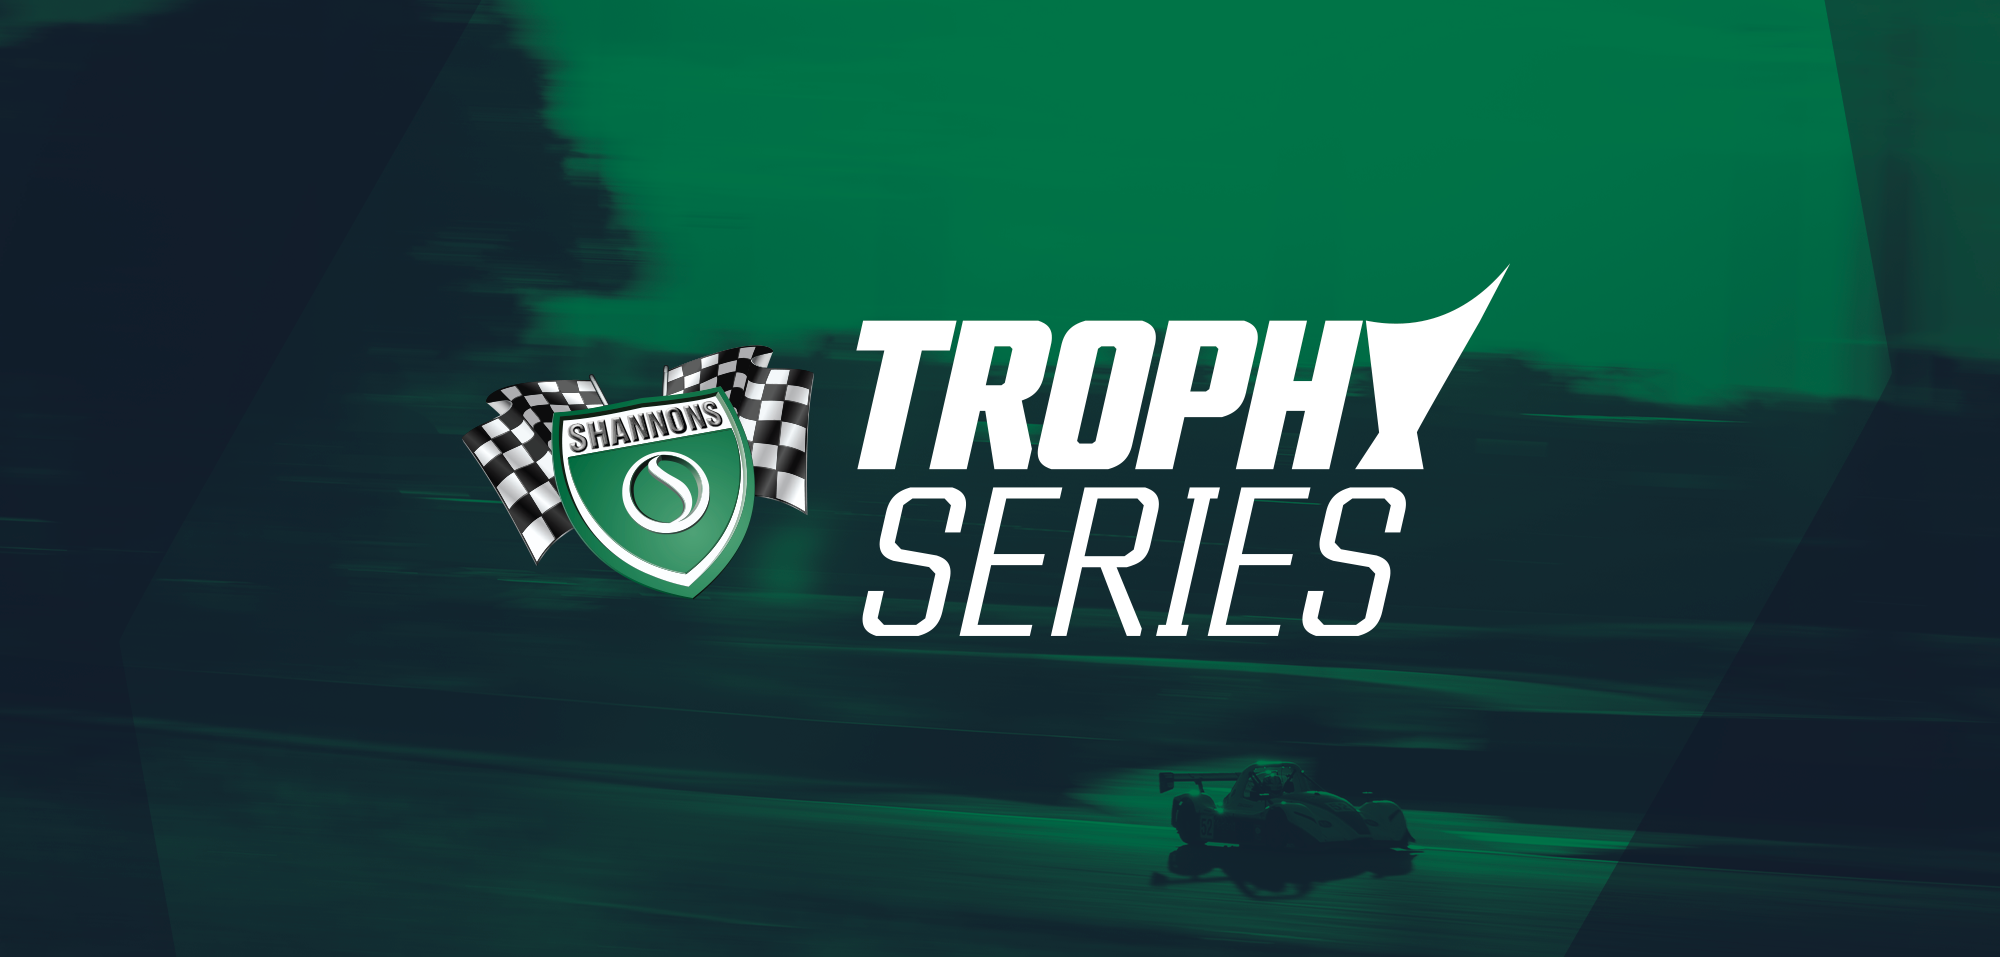 Shannons-Trophy-Series